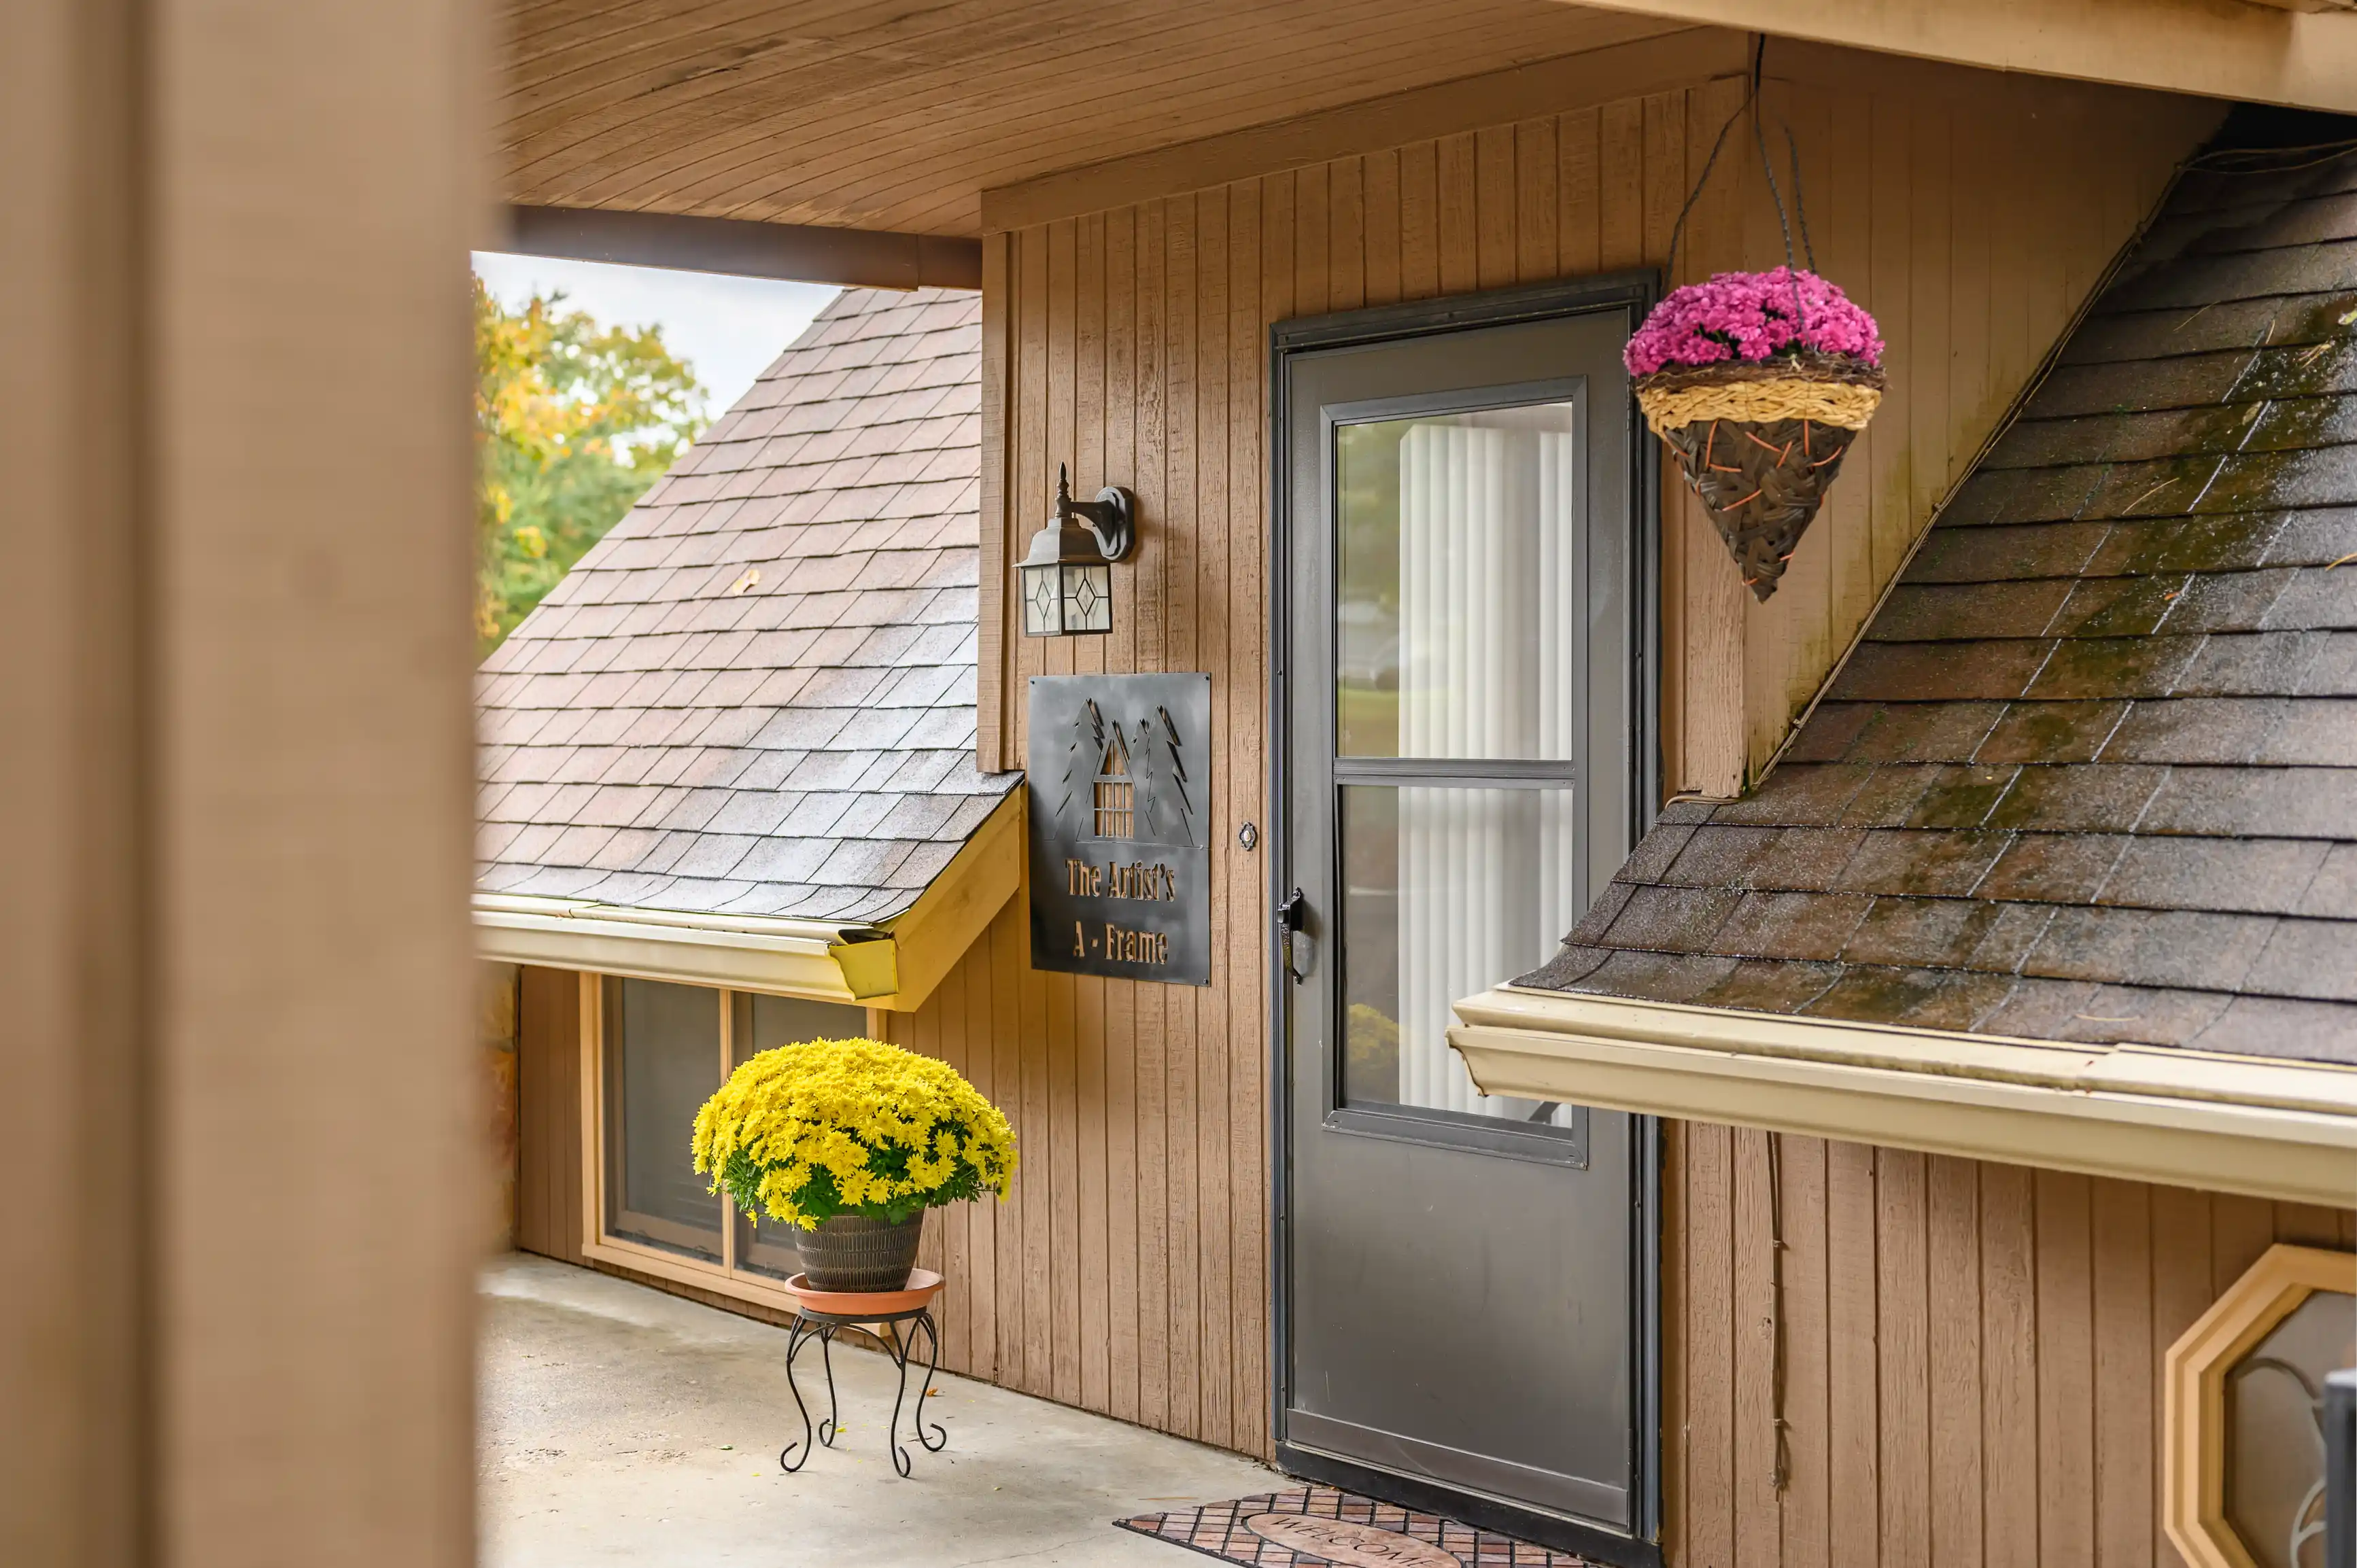 A cozy house entrance with a wooden front door, a hanging flower basket, and a potted yellow chrysanthemum by the doorstep, with a sign reading "The Artist's A-Frame".